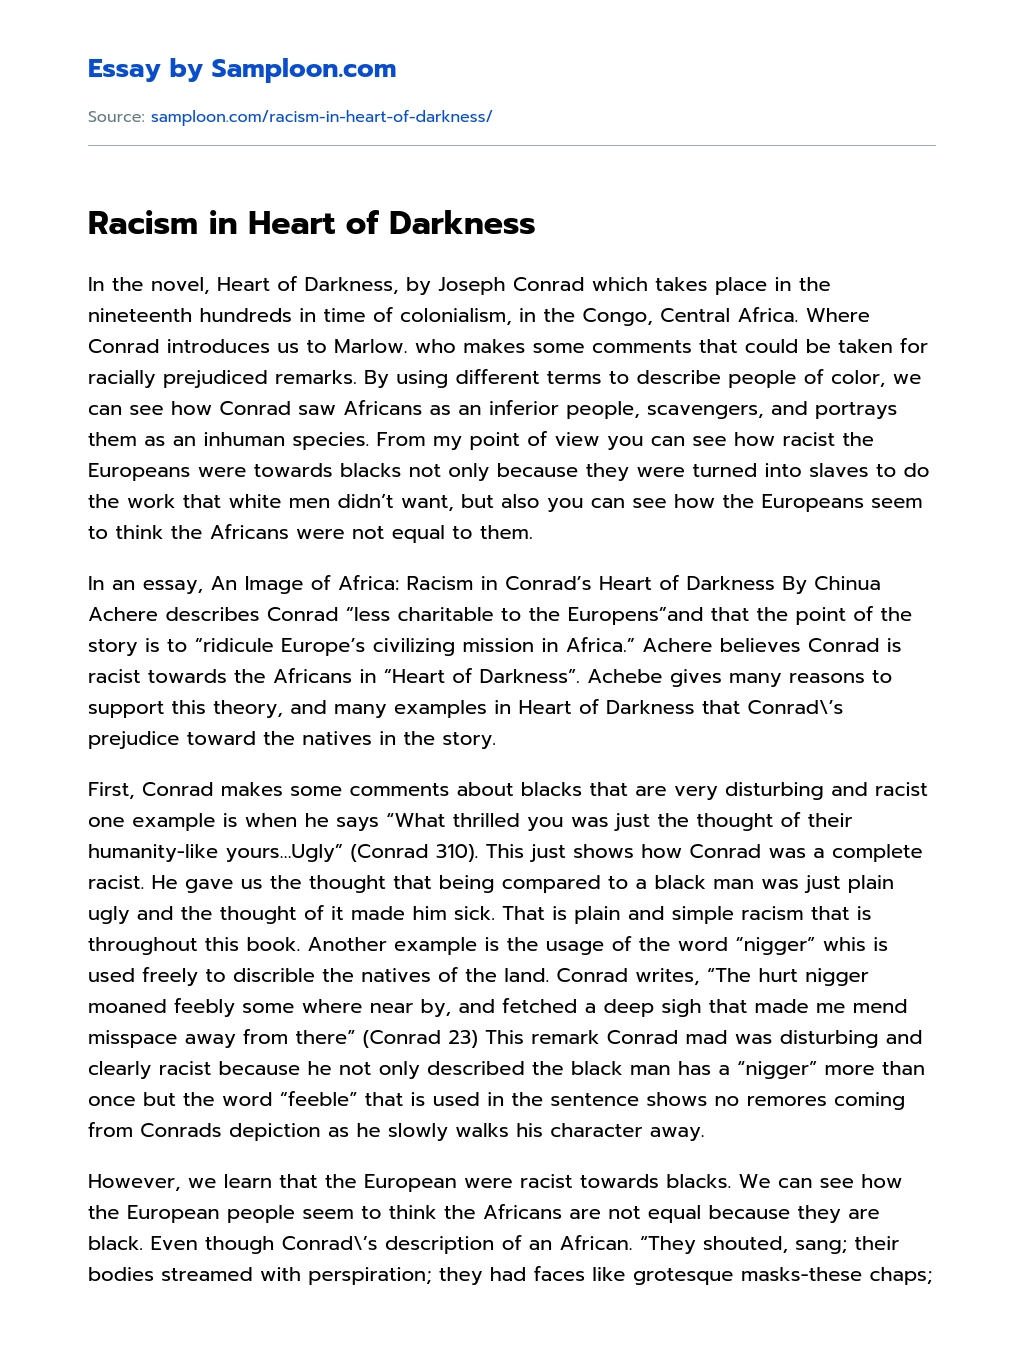 Racism Problems in Heart of Darkness Summary essay